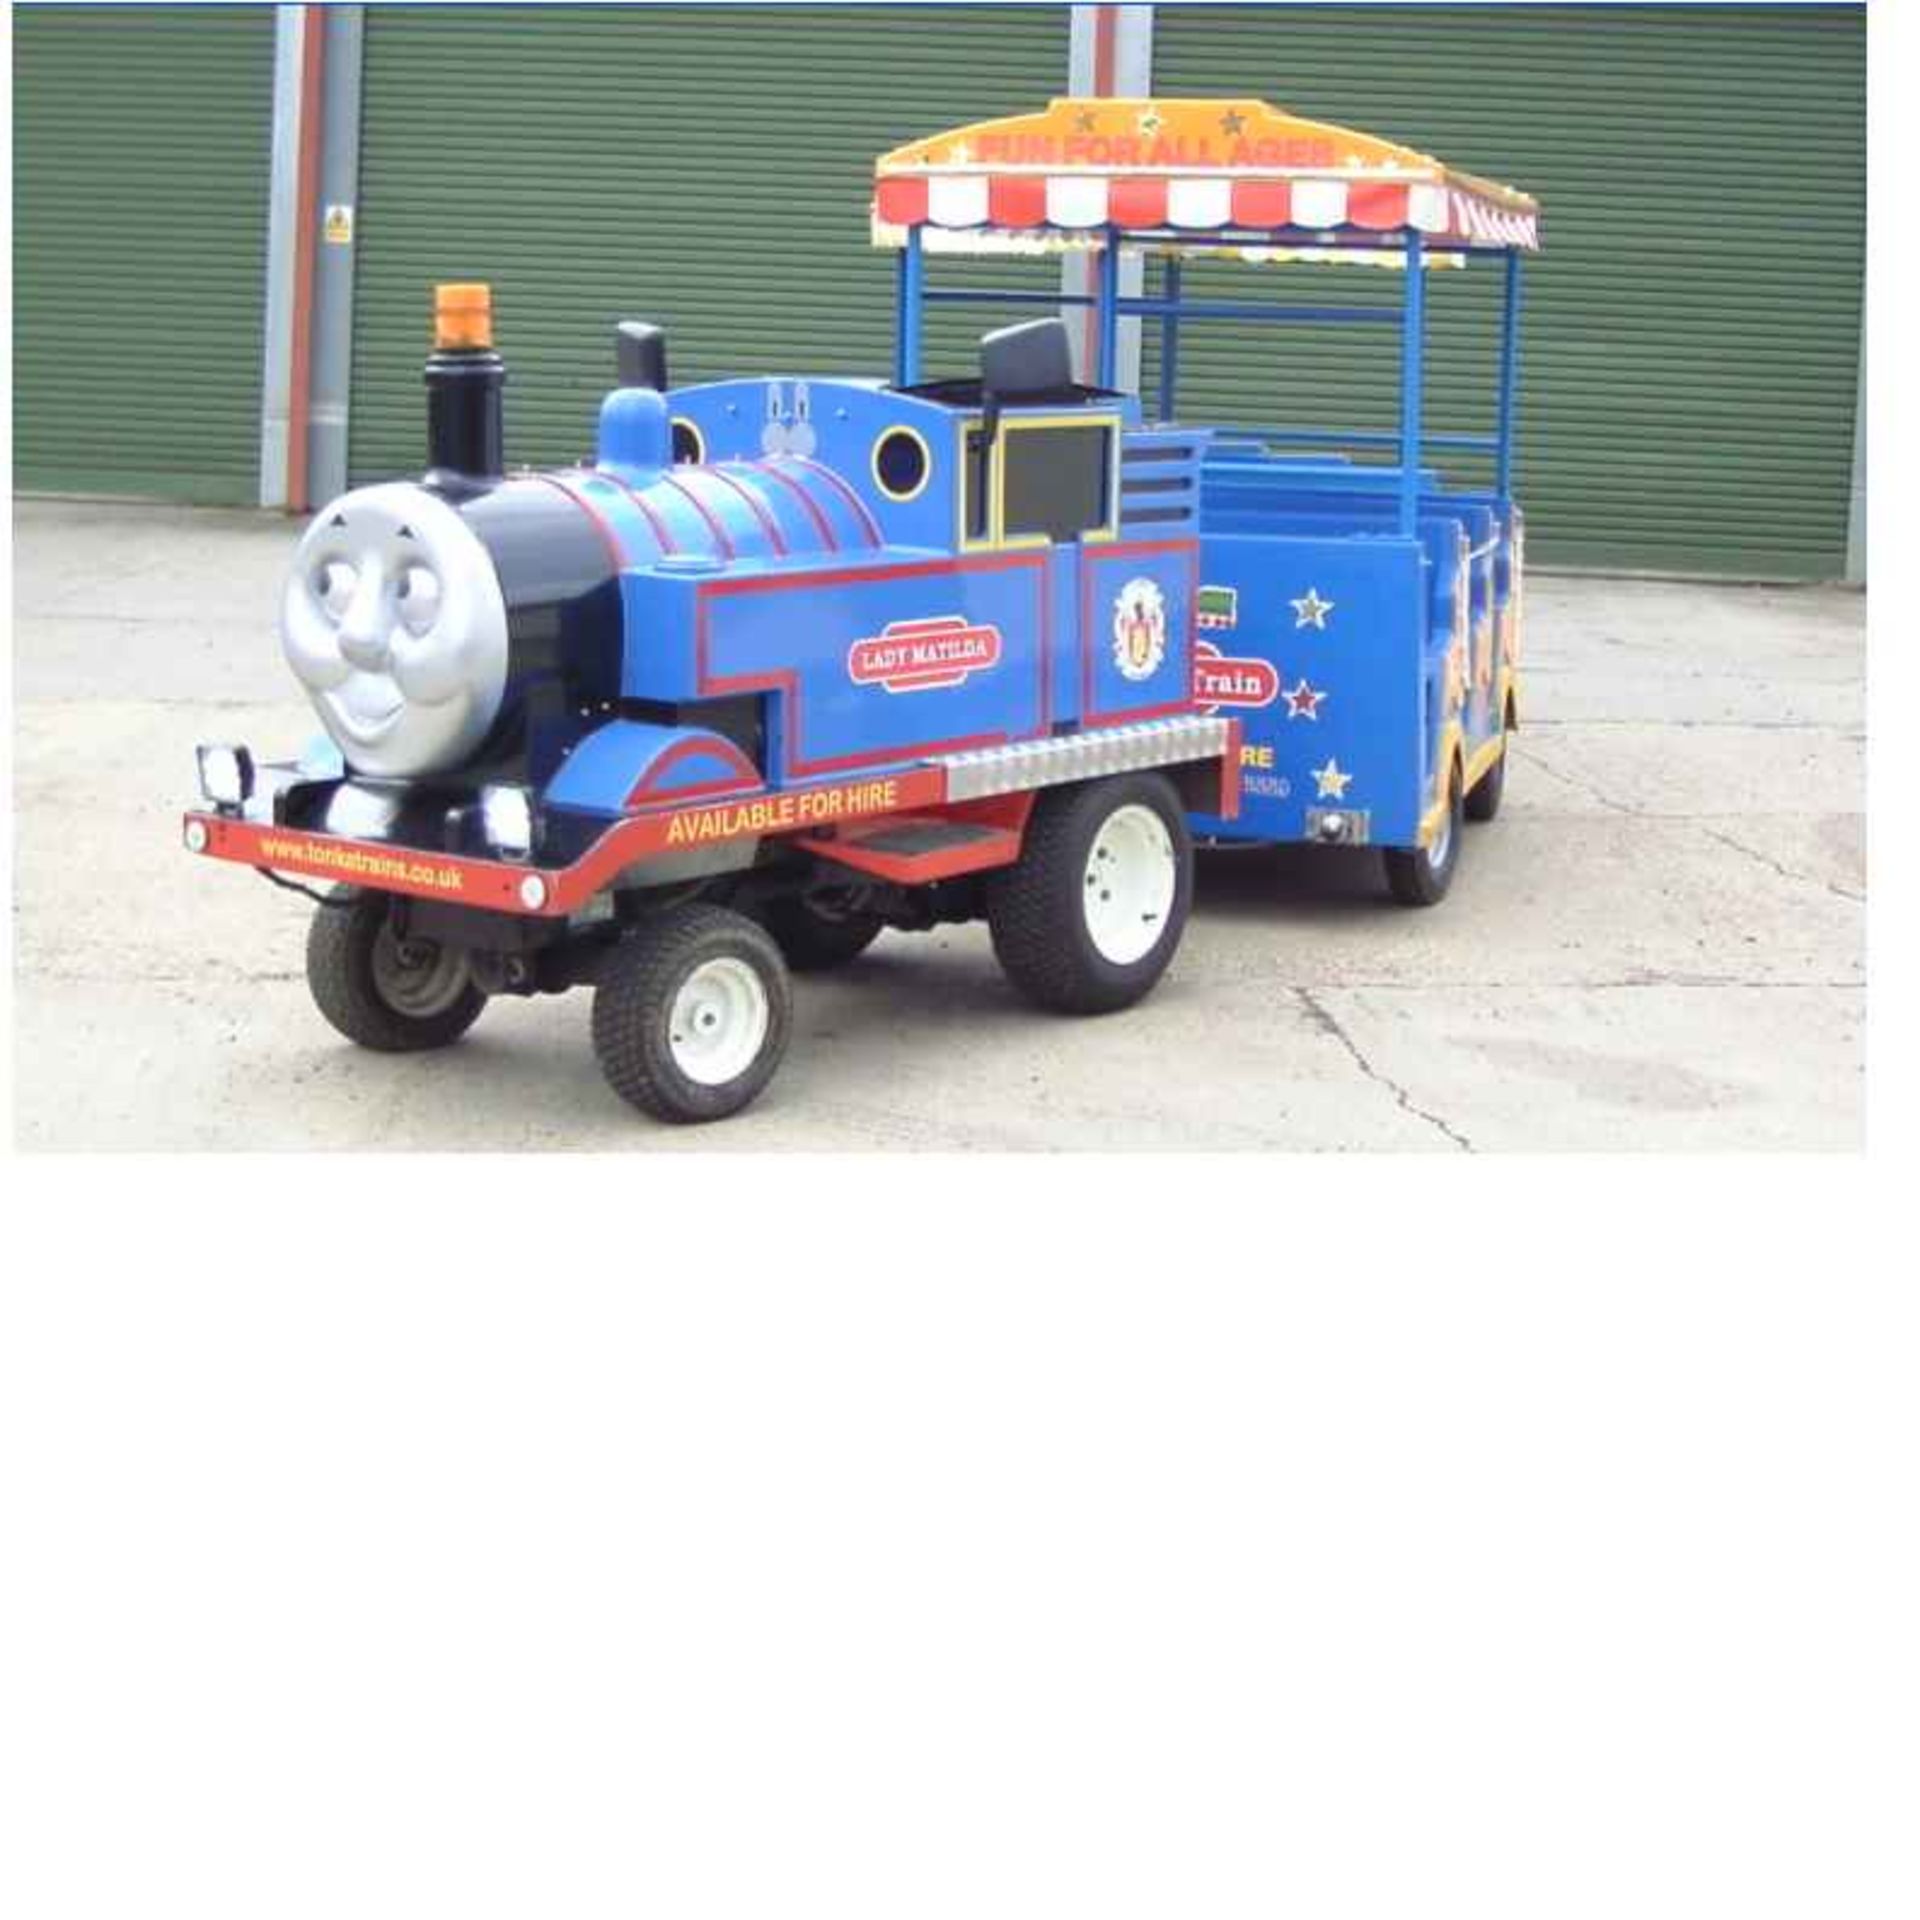 Matilda Land Train  - NO VAT A rare opportunity to acquire this lovely LAND TRAIN in absolutely